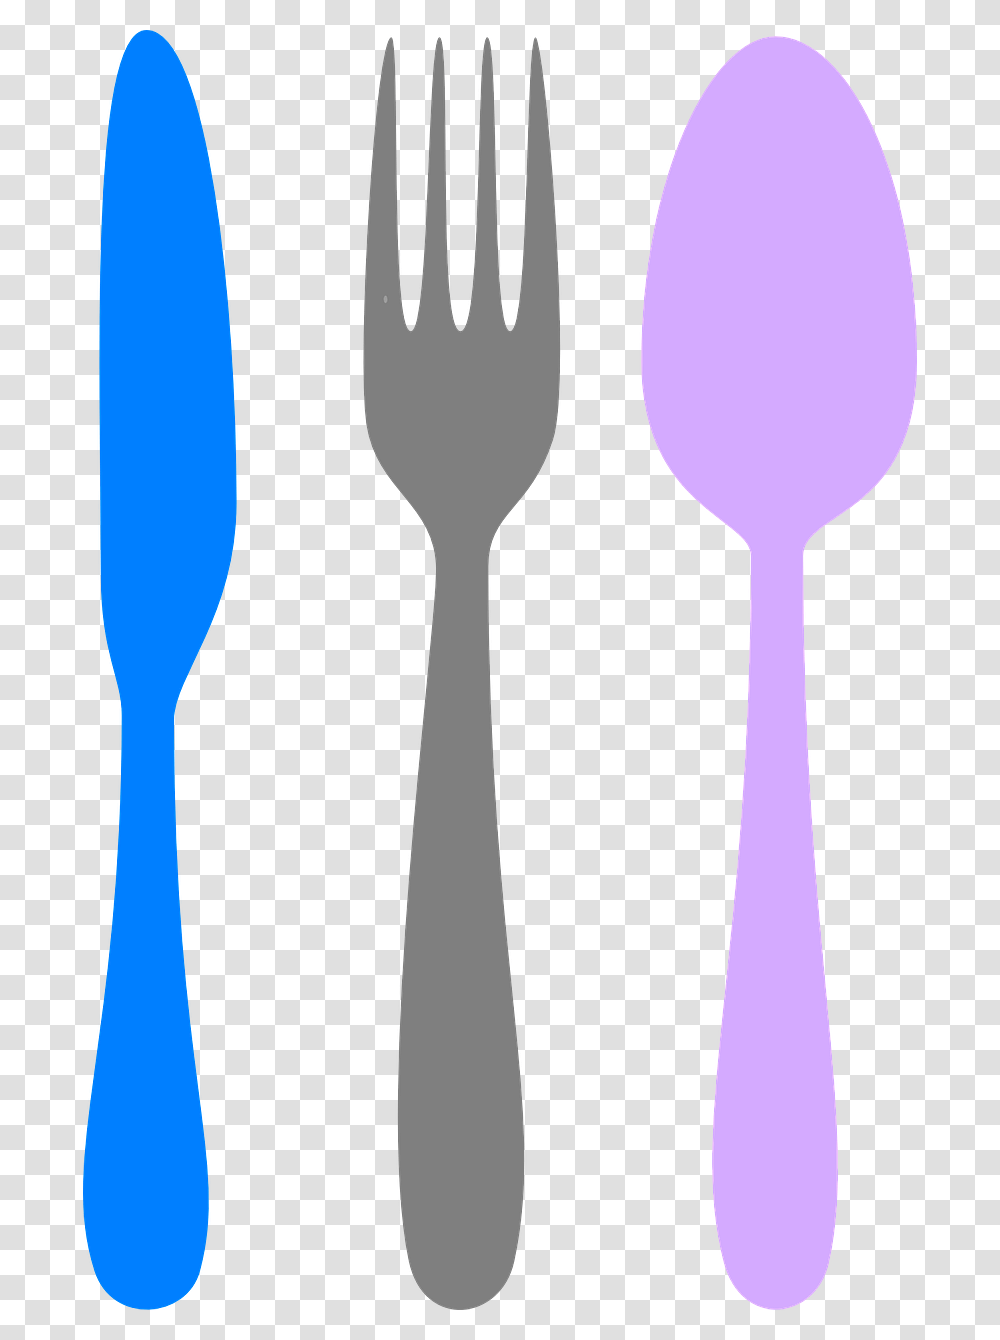 Knife Fork Spoon Silverware Image Clip Art Cutlery Transparent Png